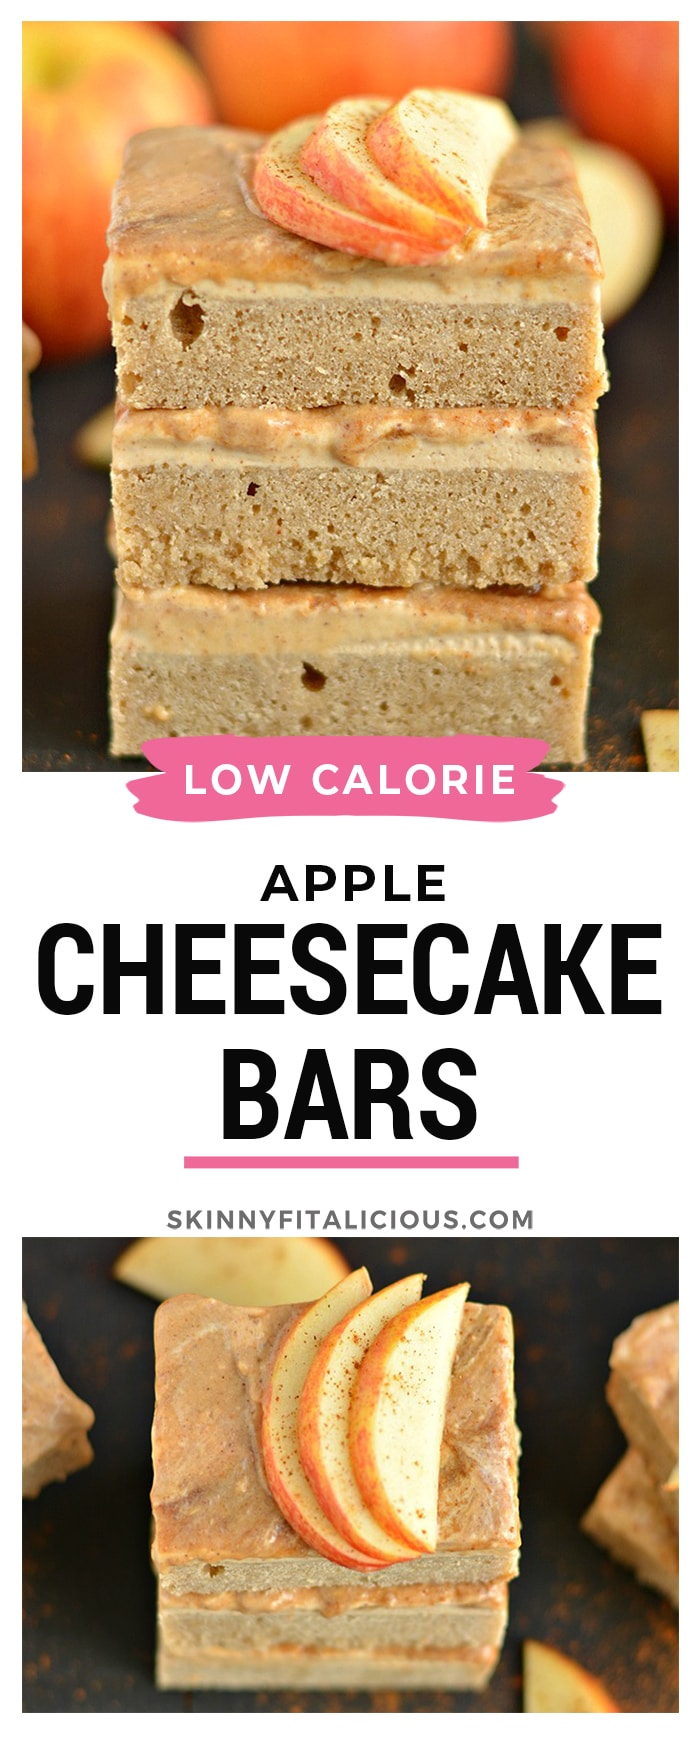 Greek Apple Cinnamon Cheesecake Bars are a lighter version of classic cheesecake. Spiced with fall flavors and made with Greek cream cheese, this healthier dessert is a party favorite!